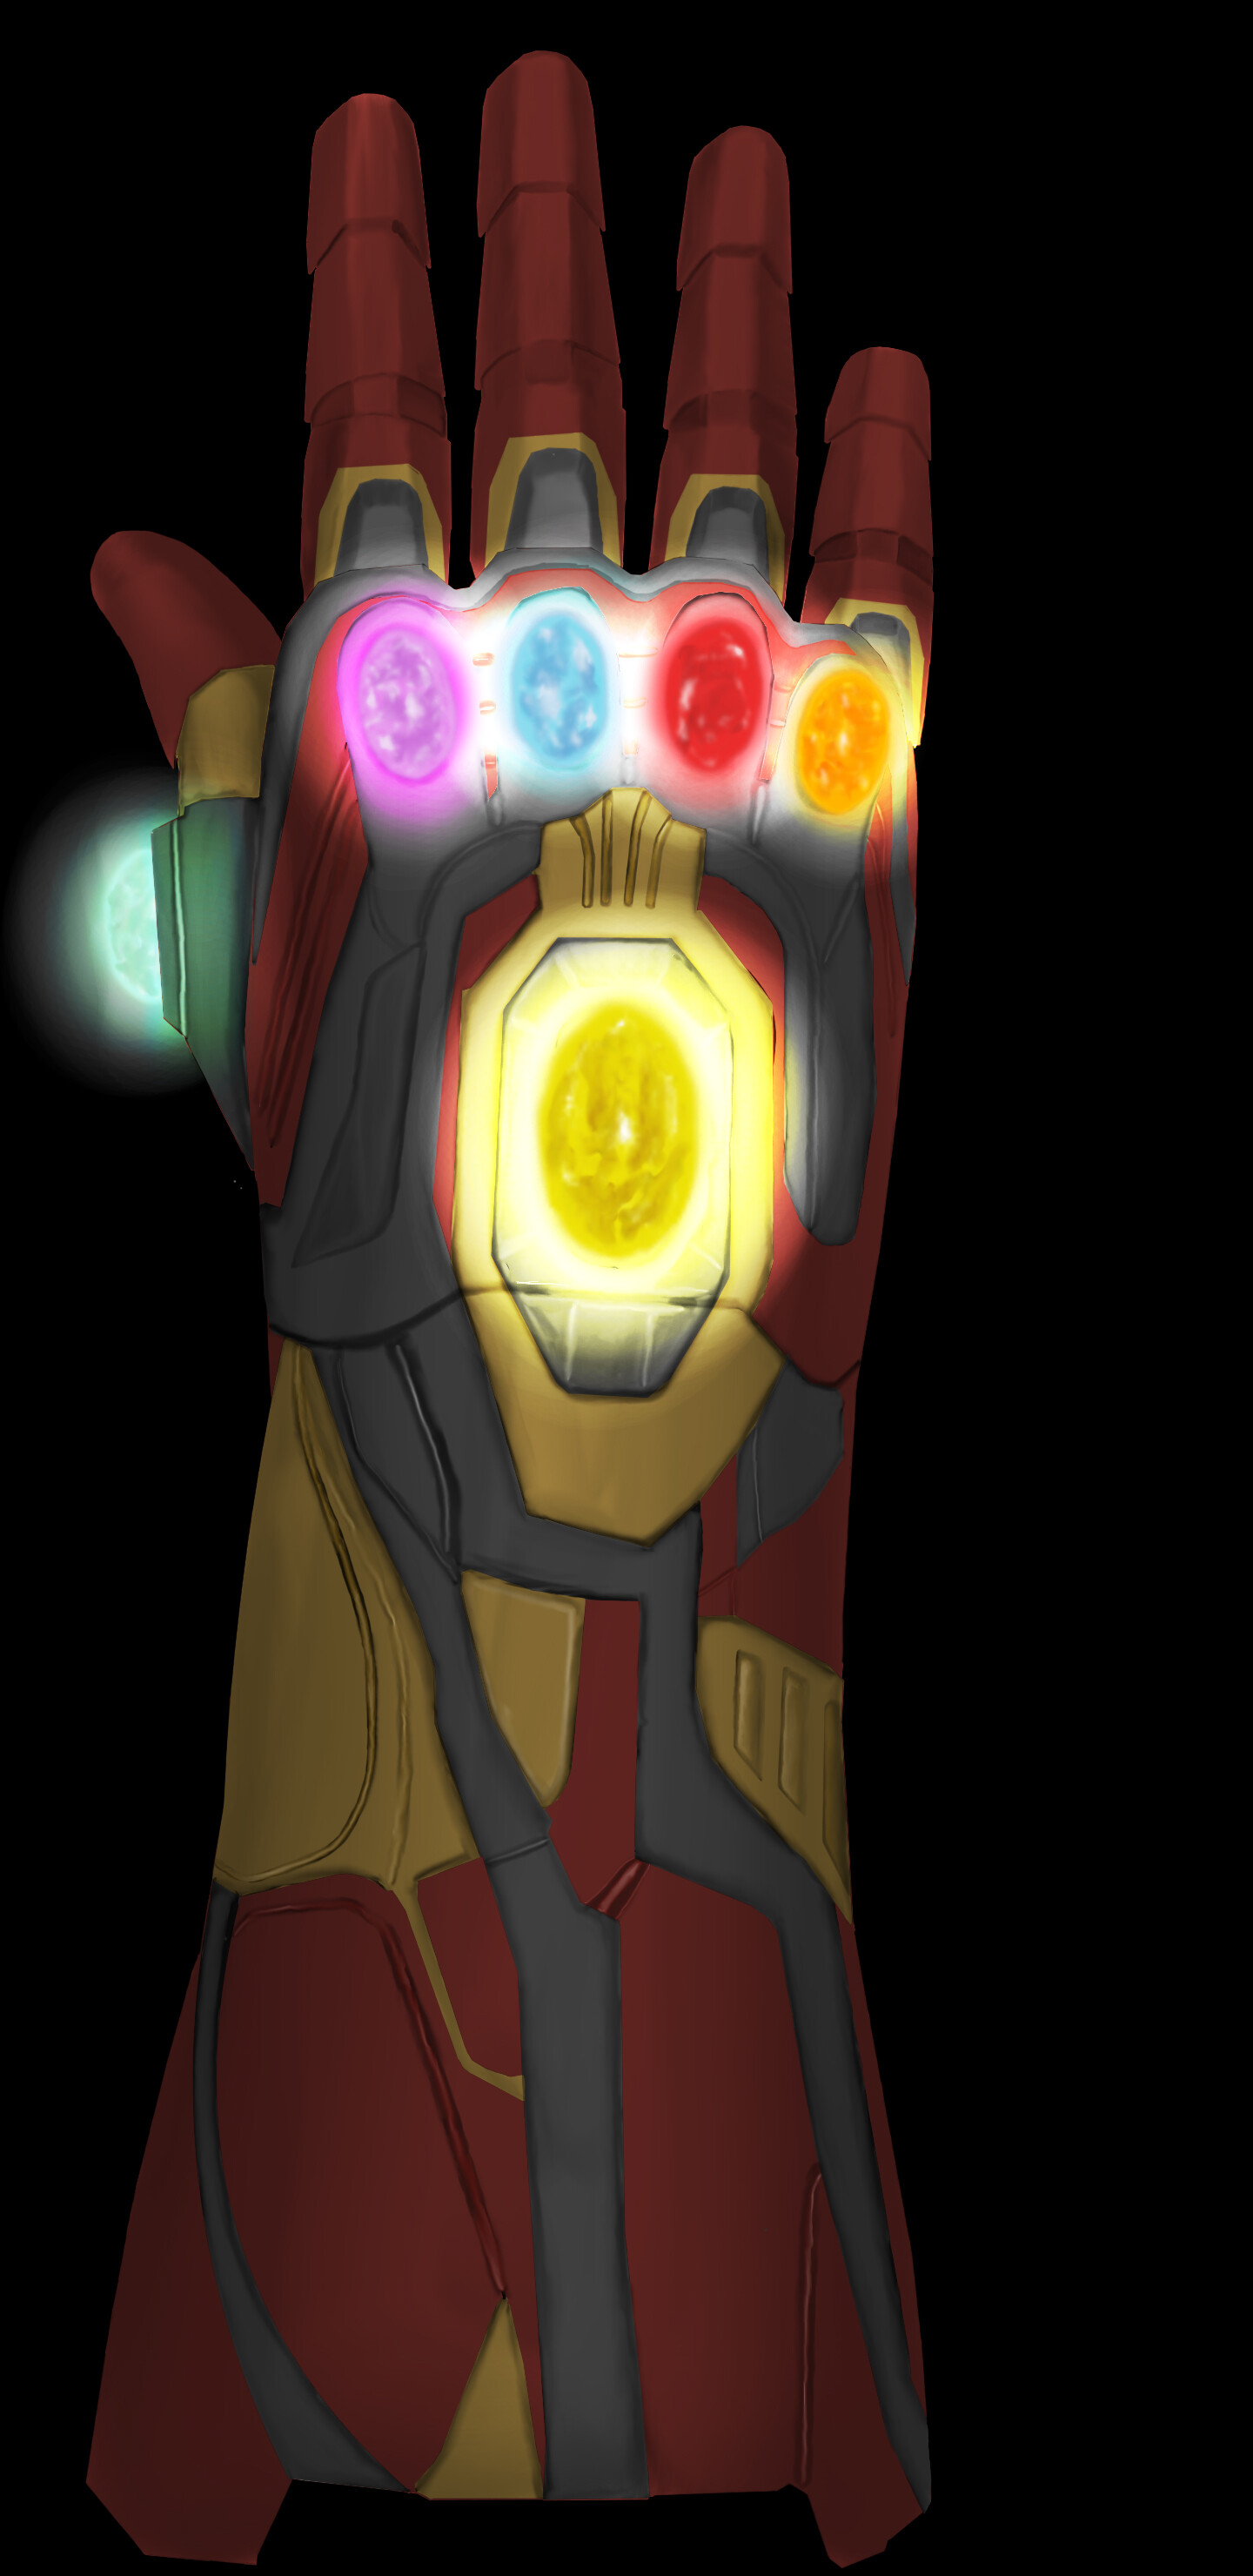 How To Draw The Infinity Gauntlet From The Avengers  Draw Infinity Gauntlet  HD Png Download  Transparent Png Image  PNGitem